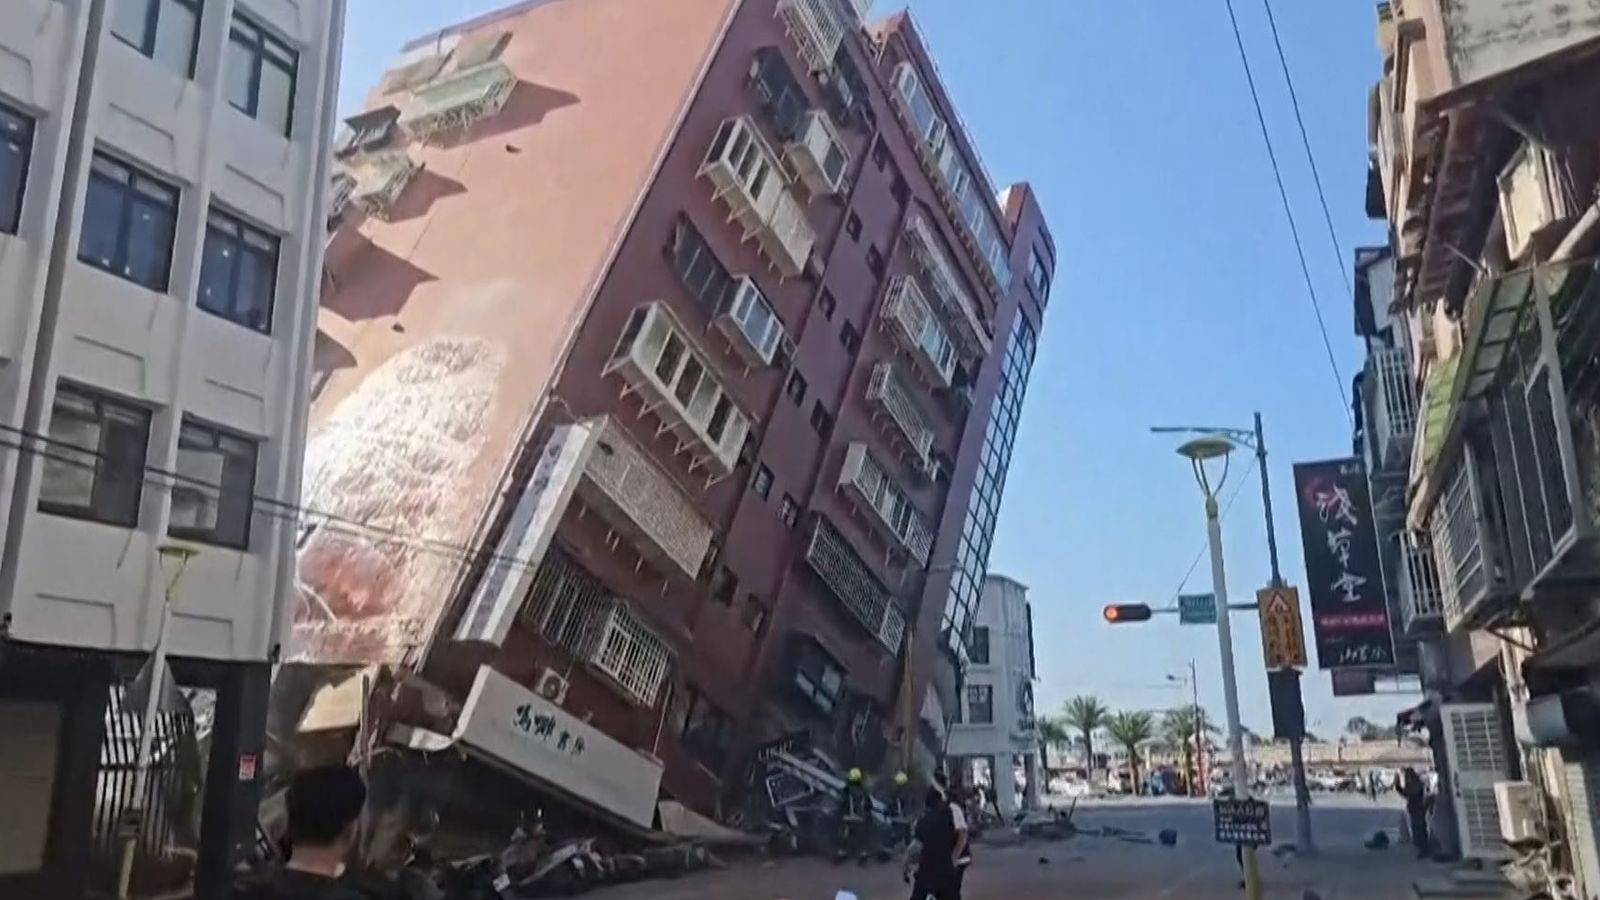 Taiwan: Thousands without power and 'people trapped in buildings' after strong earthquake